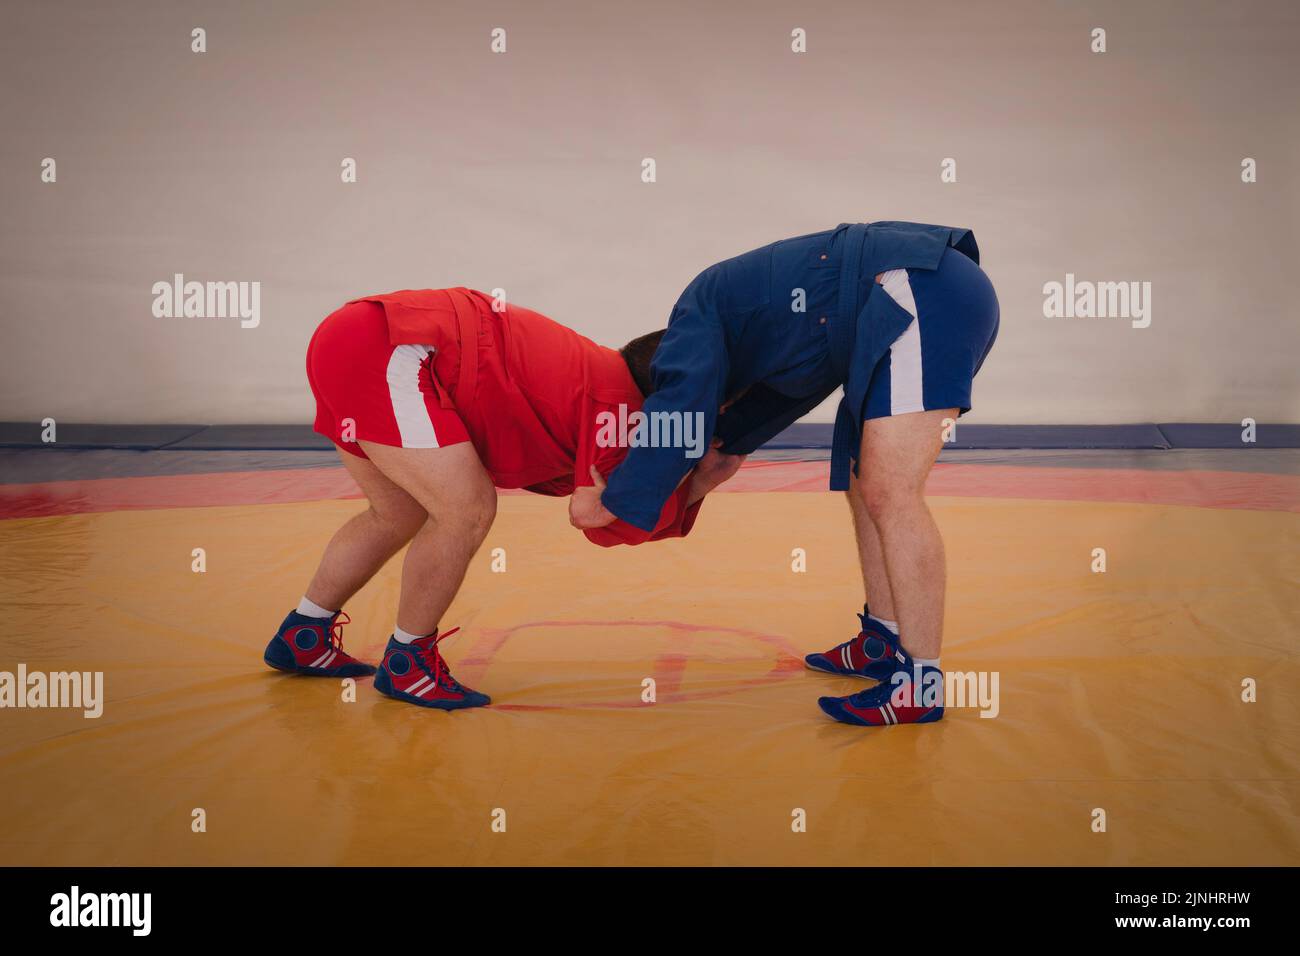 two men in blue and red tights are wrestling on a yellow tatami. Sambo wrestlers train. Sambo competition in the hall. Stock Photo